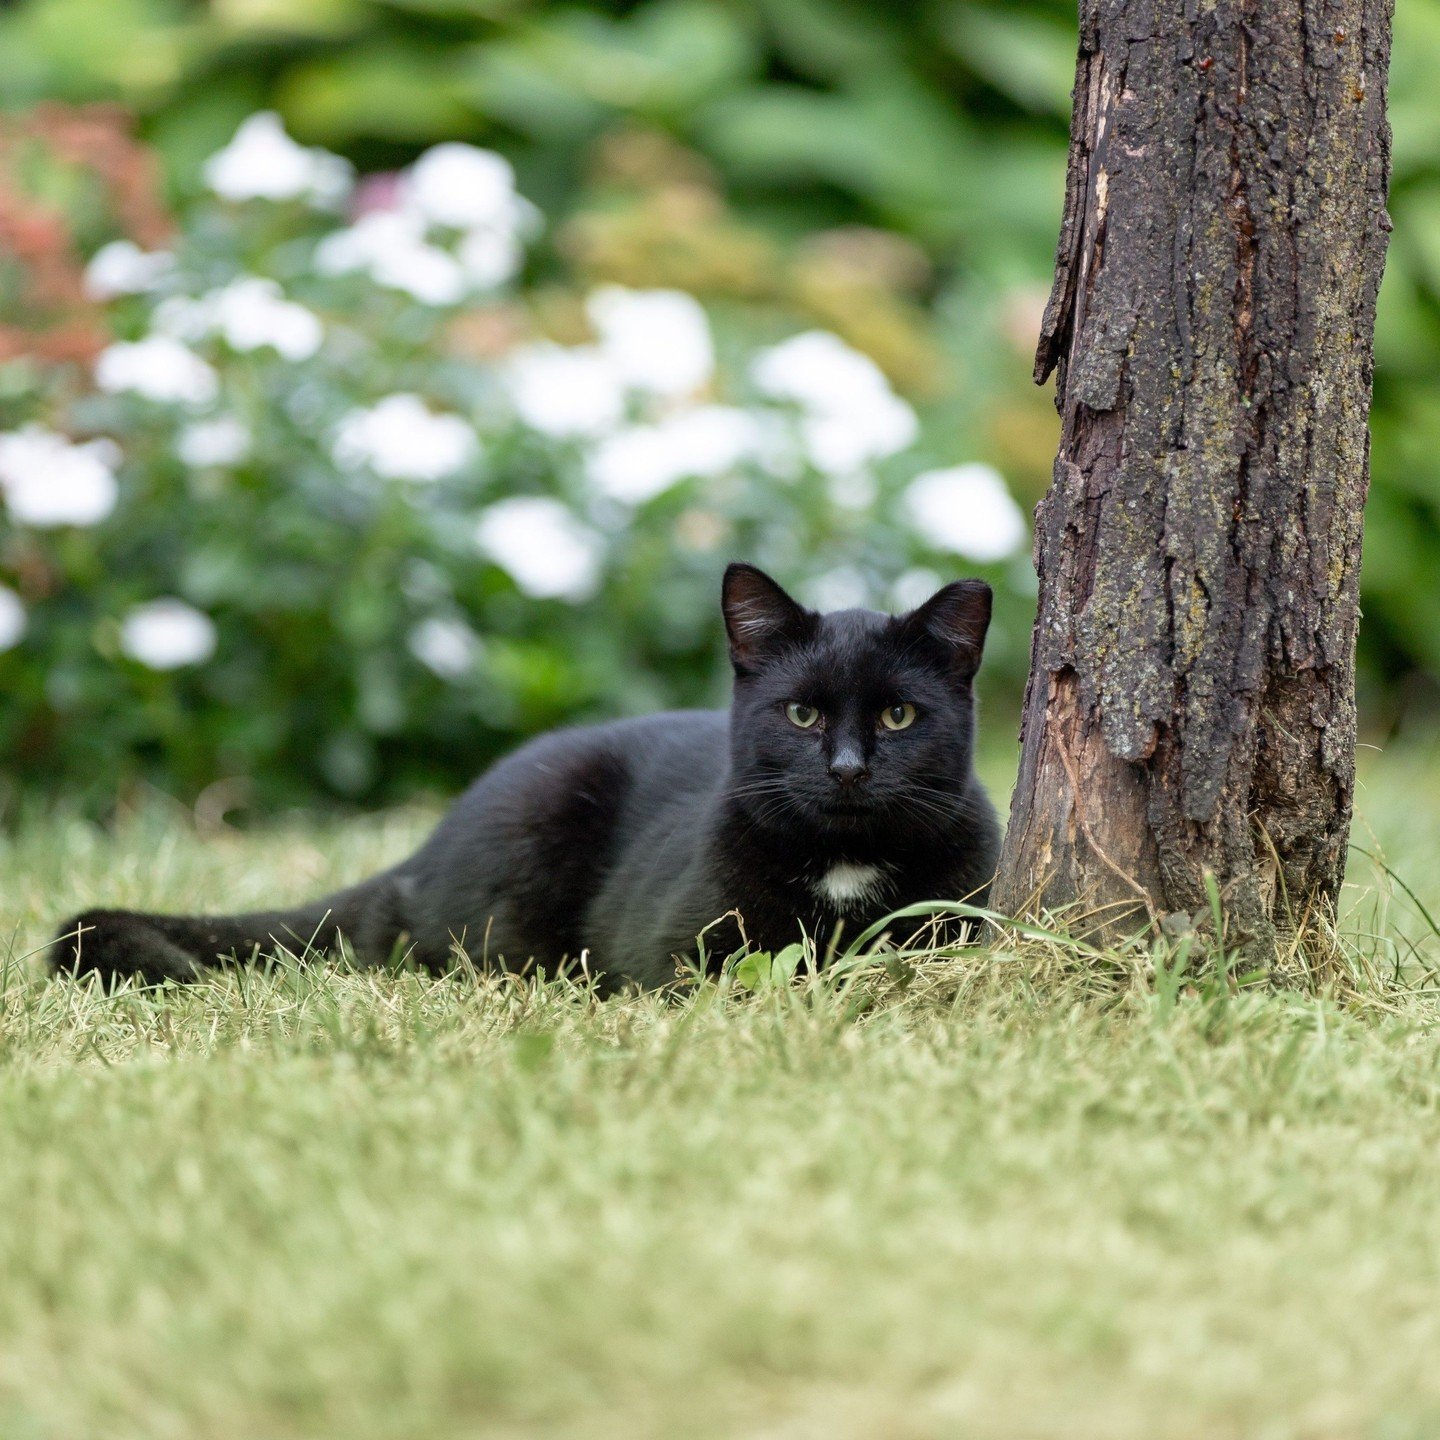 Did you know there's a difference between stray cats and feral cats?⁠
⁠
The term &quot;stray&quot; refers to cats who are socialized to people. They are generally used to being fed, cared for, and pet by humans. Stray cats live outdoors and may have 